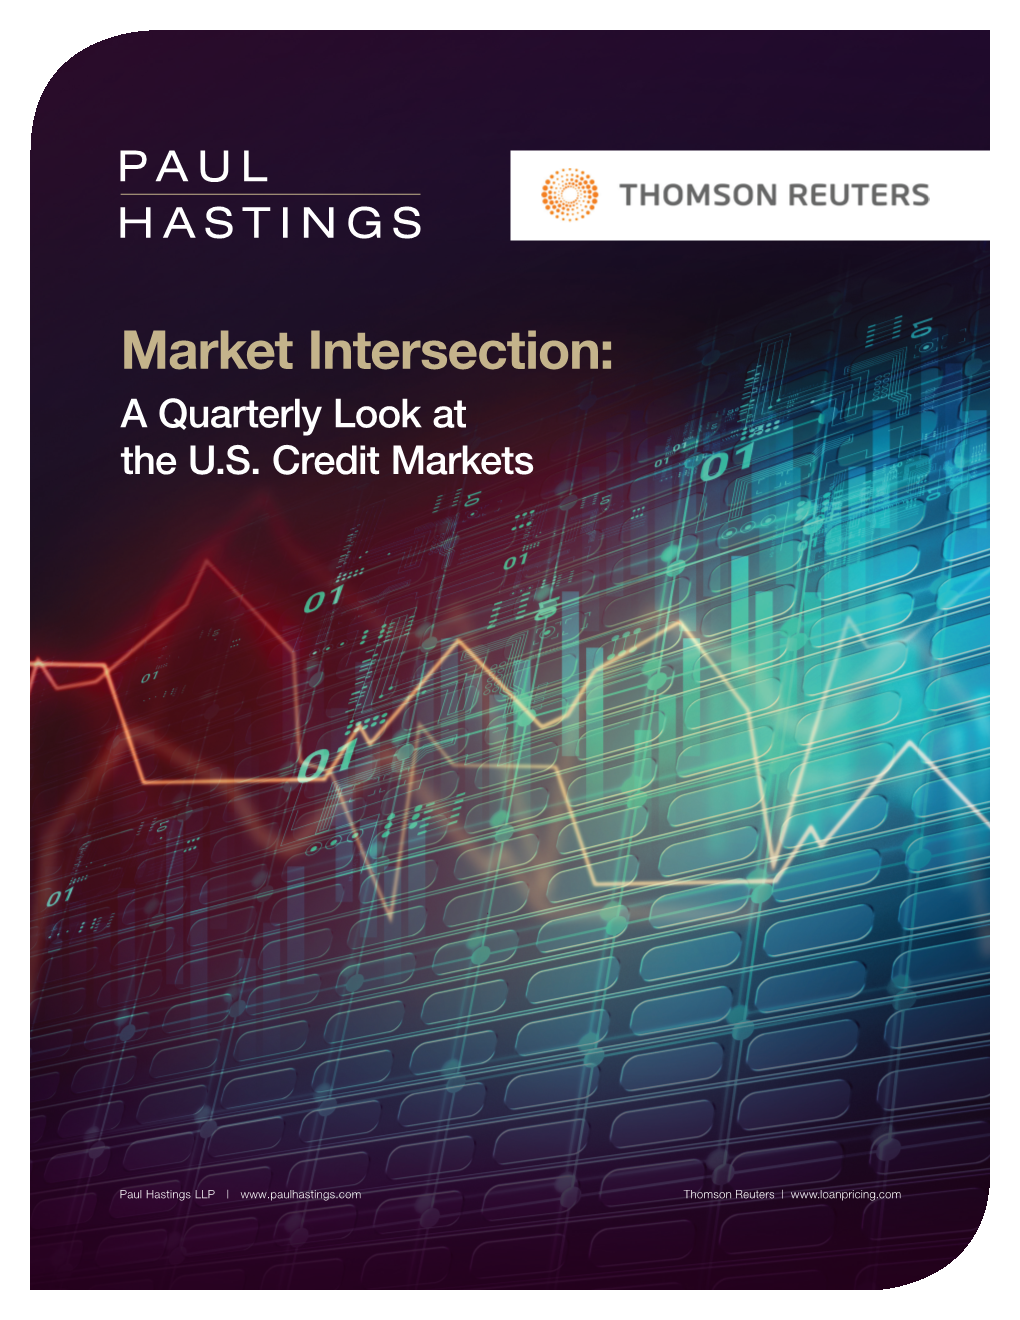 Market Intersection: a Quarterly Look at the U.S